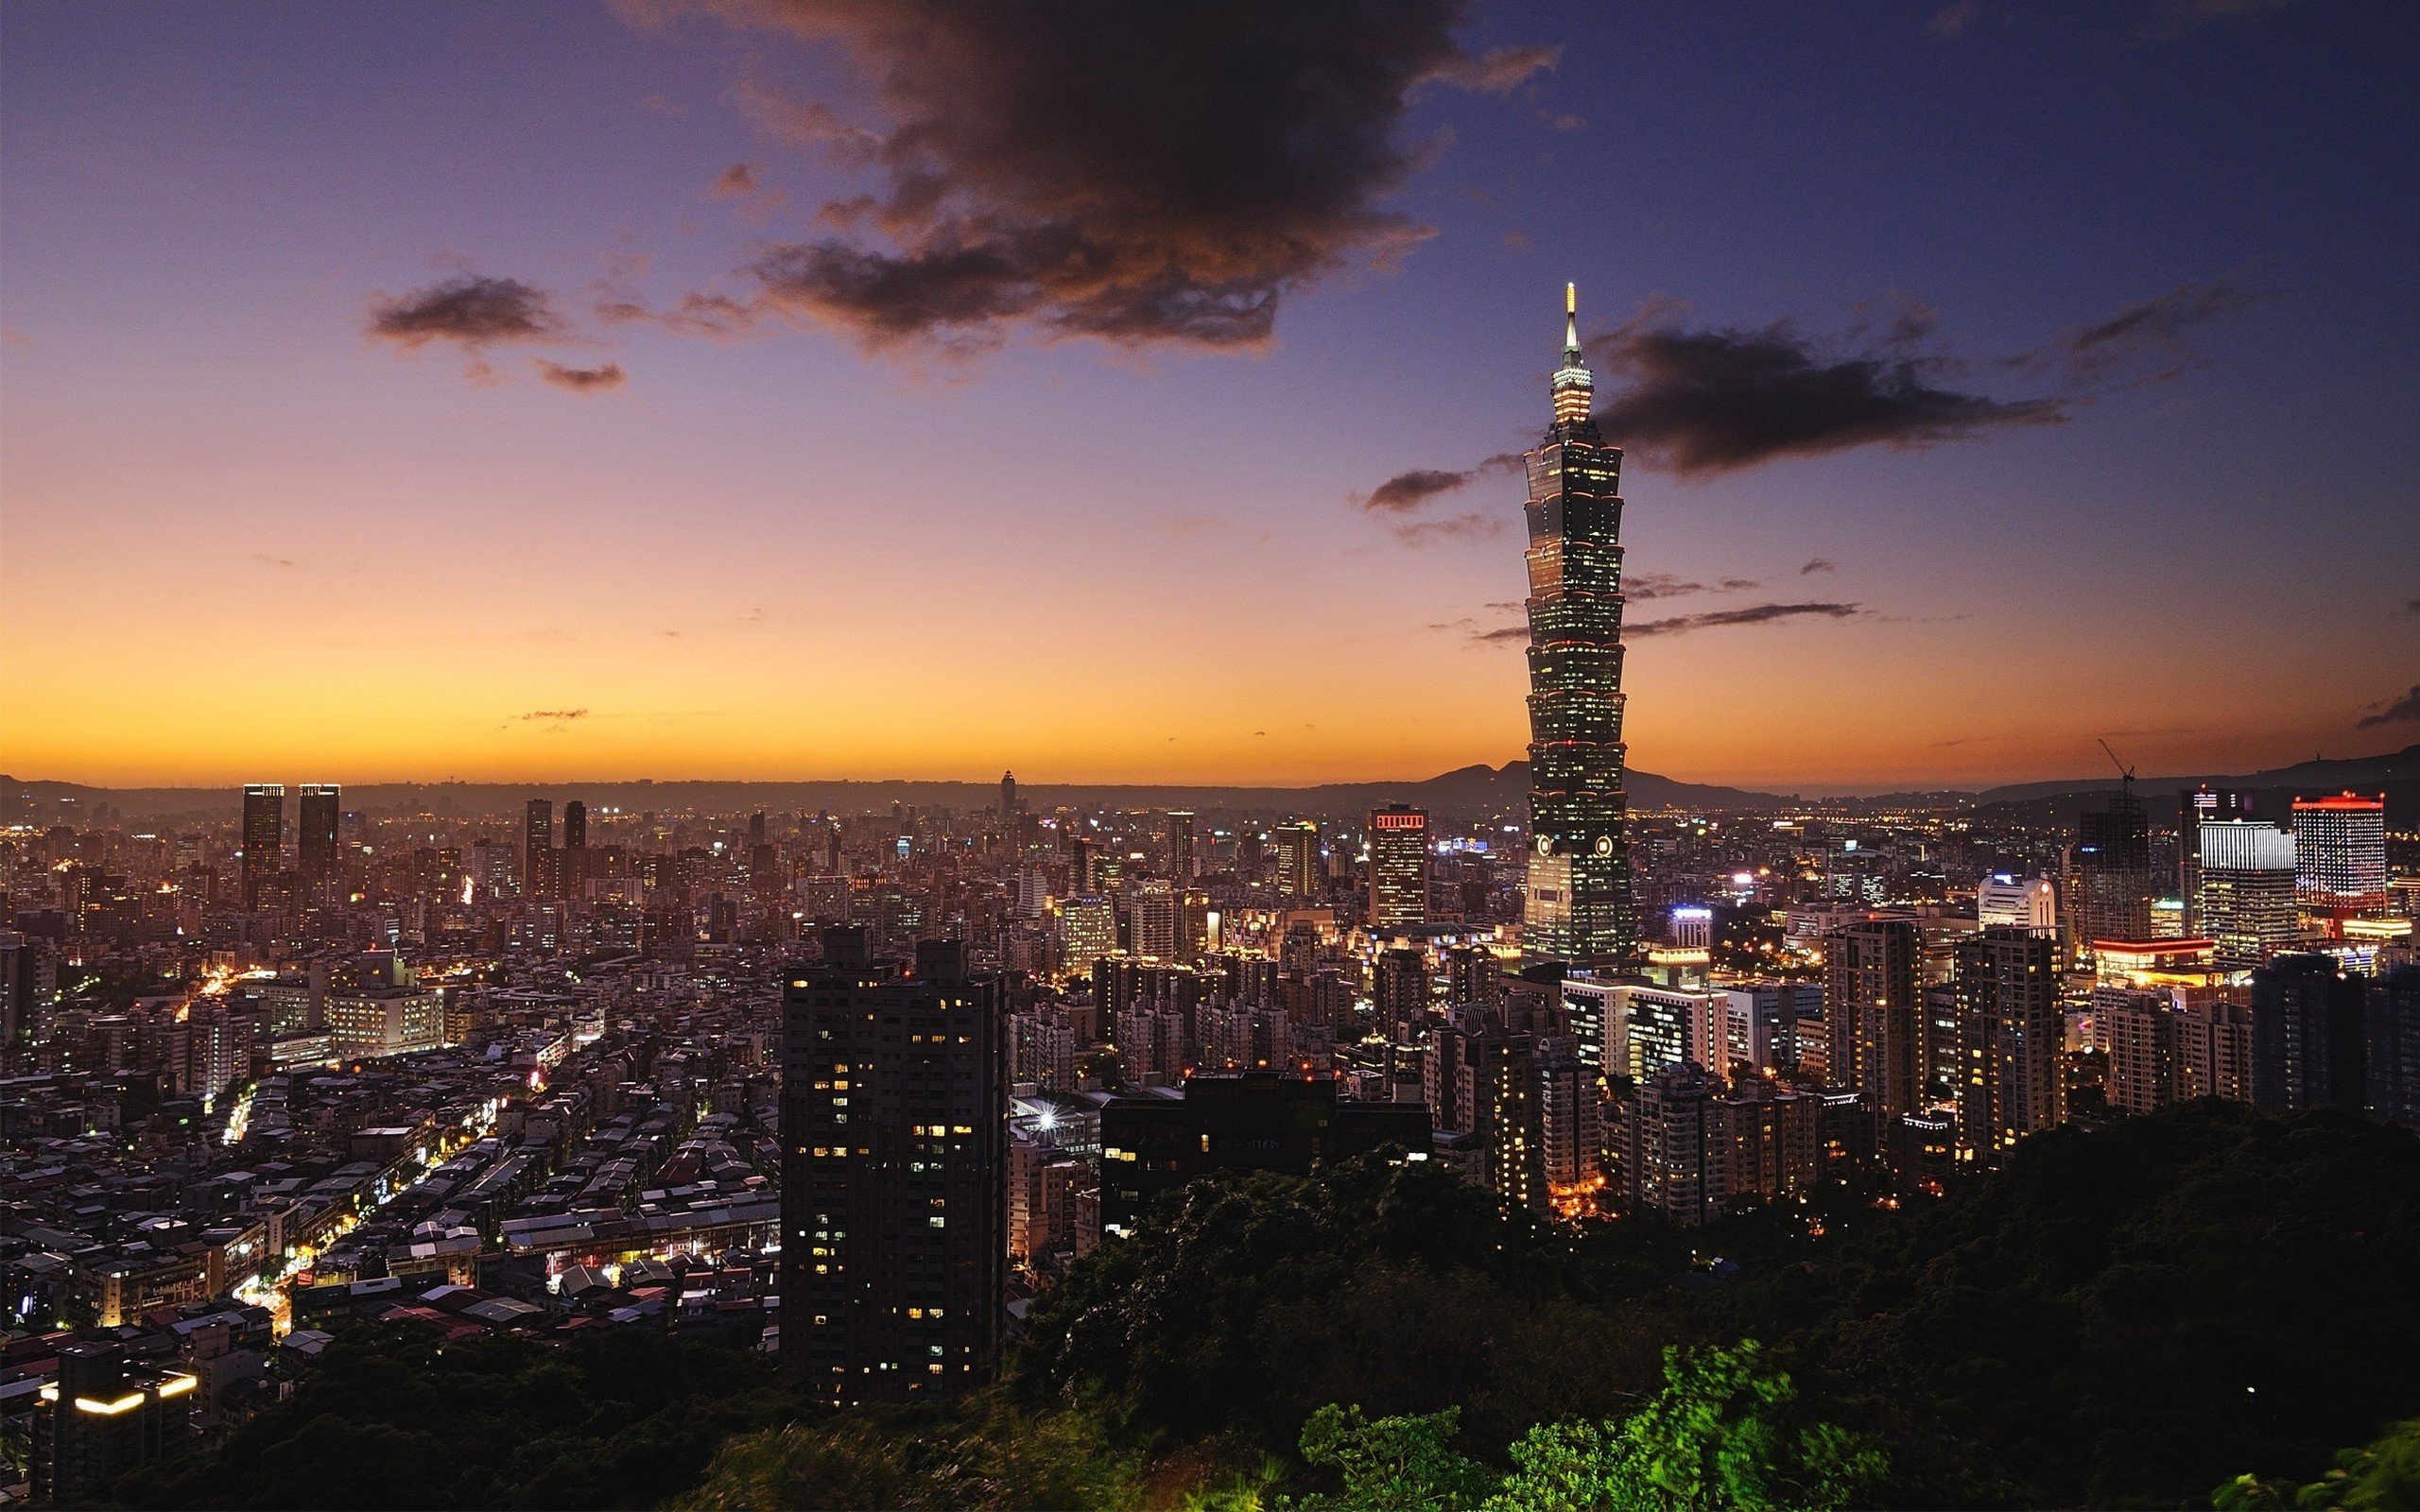 landscapes, Cityscapes, Towns, Skyscrapers, Taipei, City, Skyline, Taipei, 101 Wallpaper